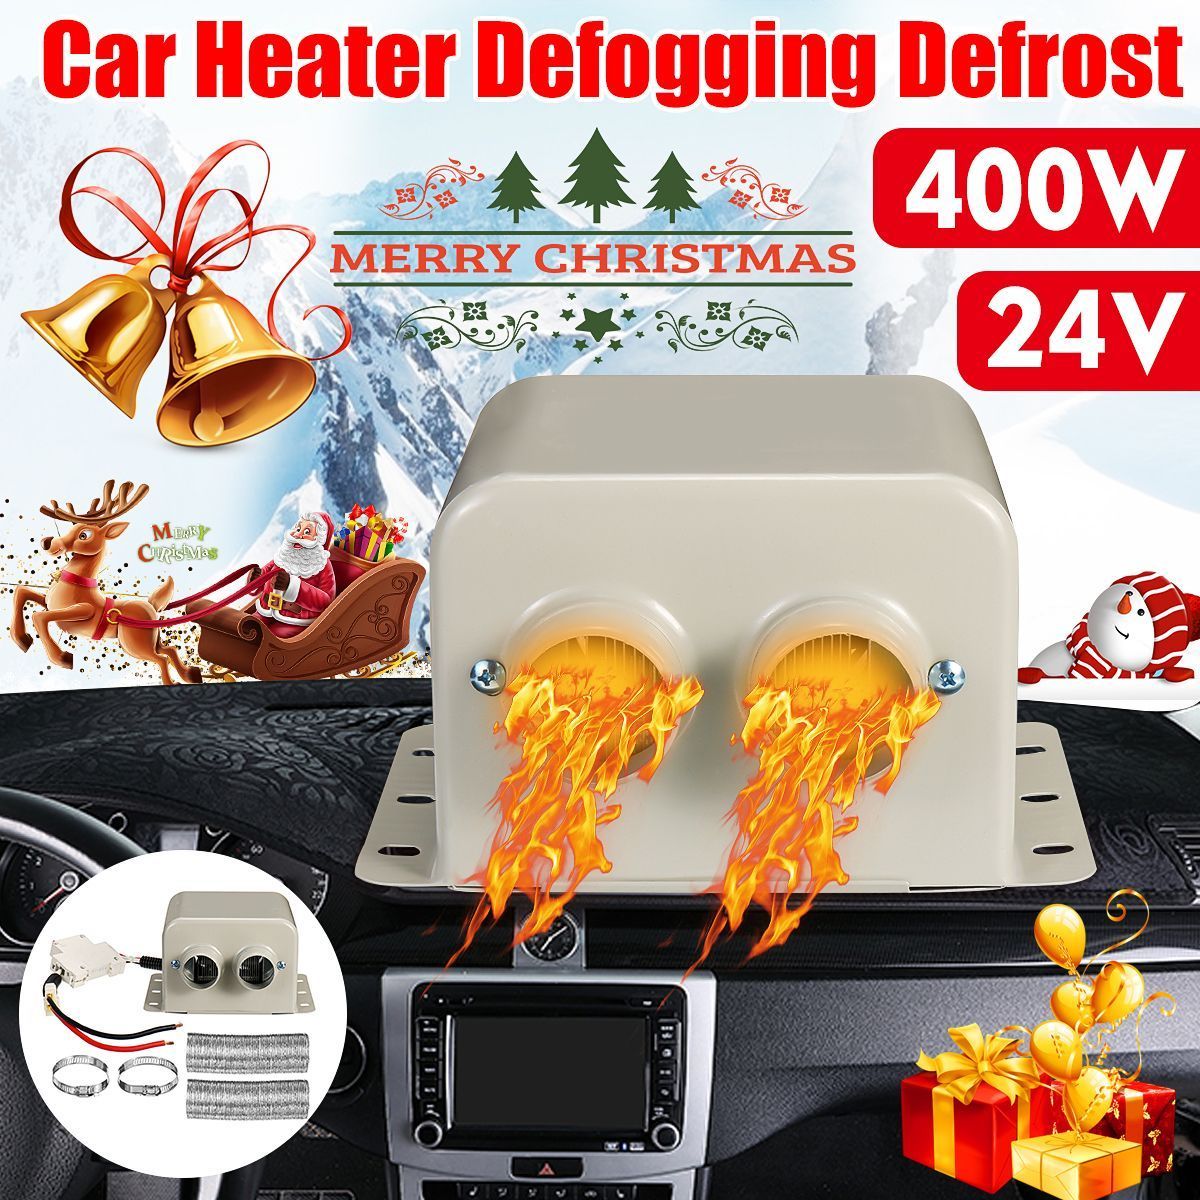 24V-400W-Car-Electric-Heater-Defrost-With-2-Air-Outlets-Maximum-About-80degC-1612717